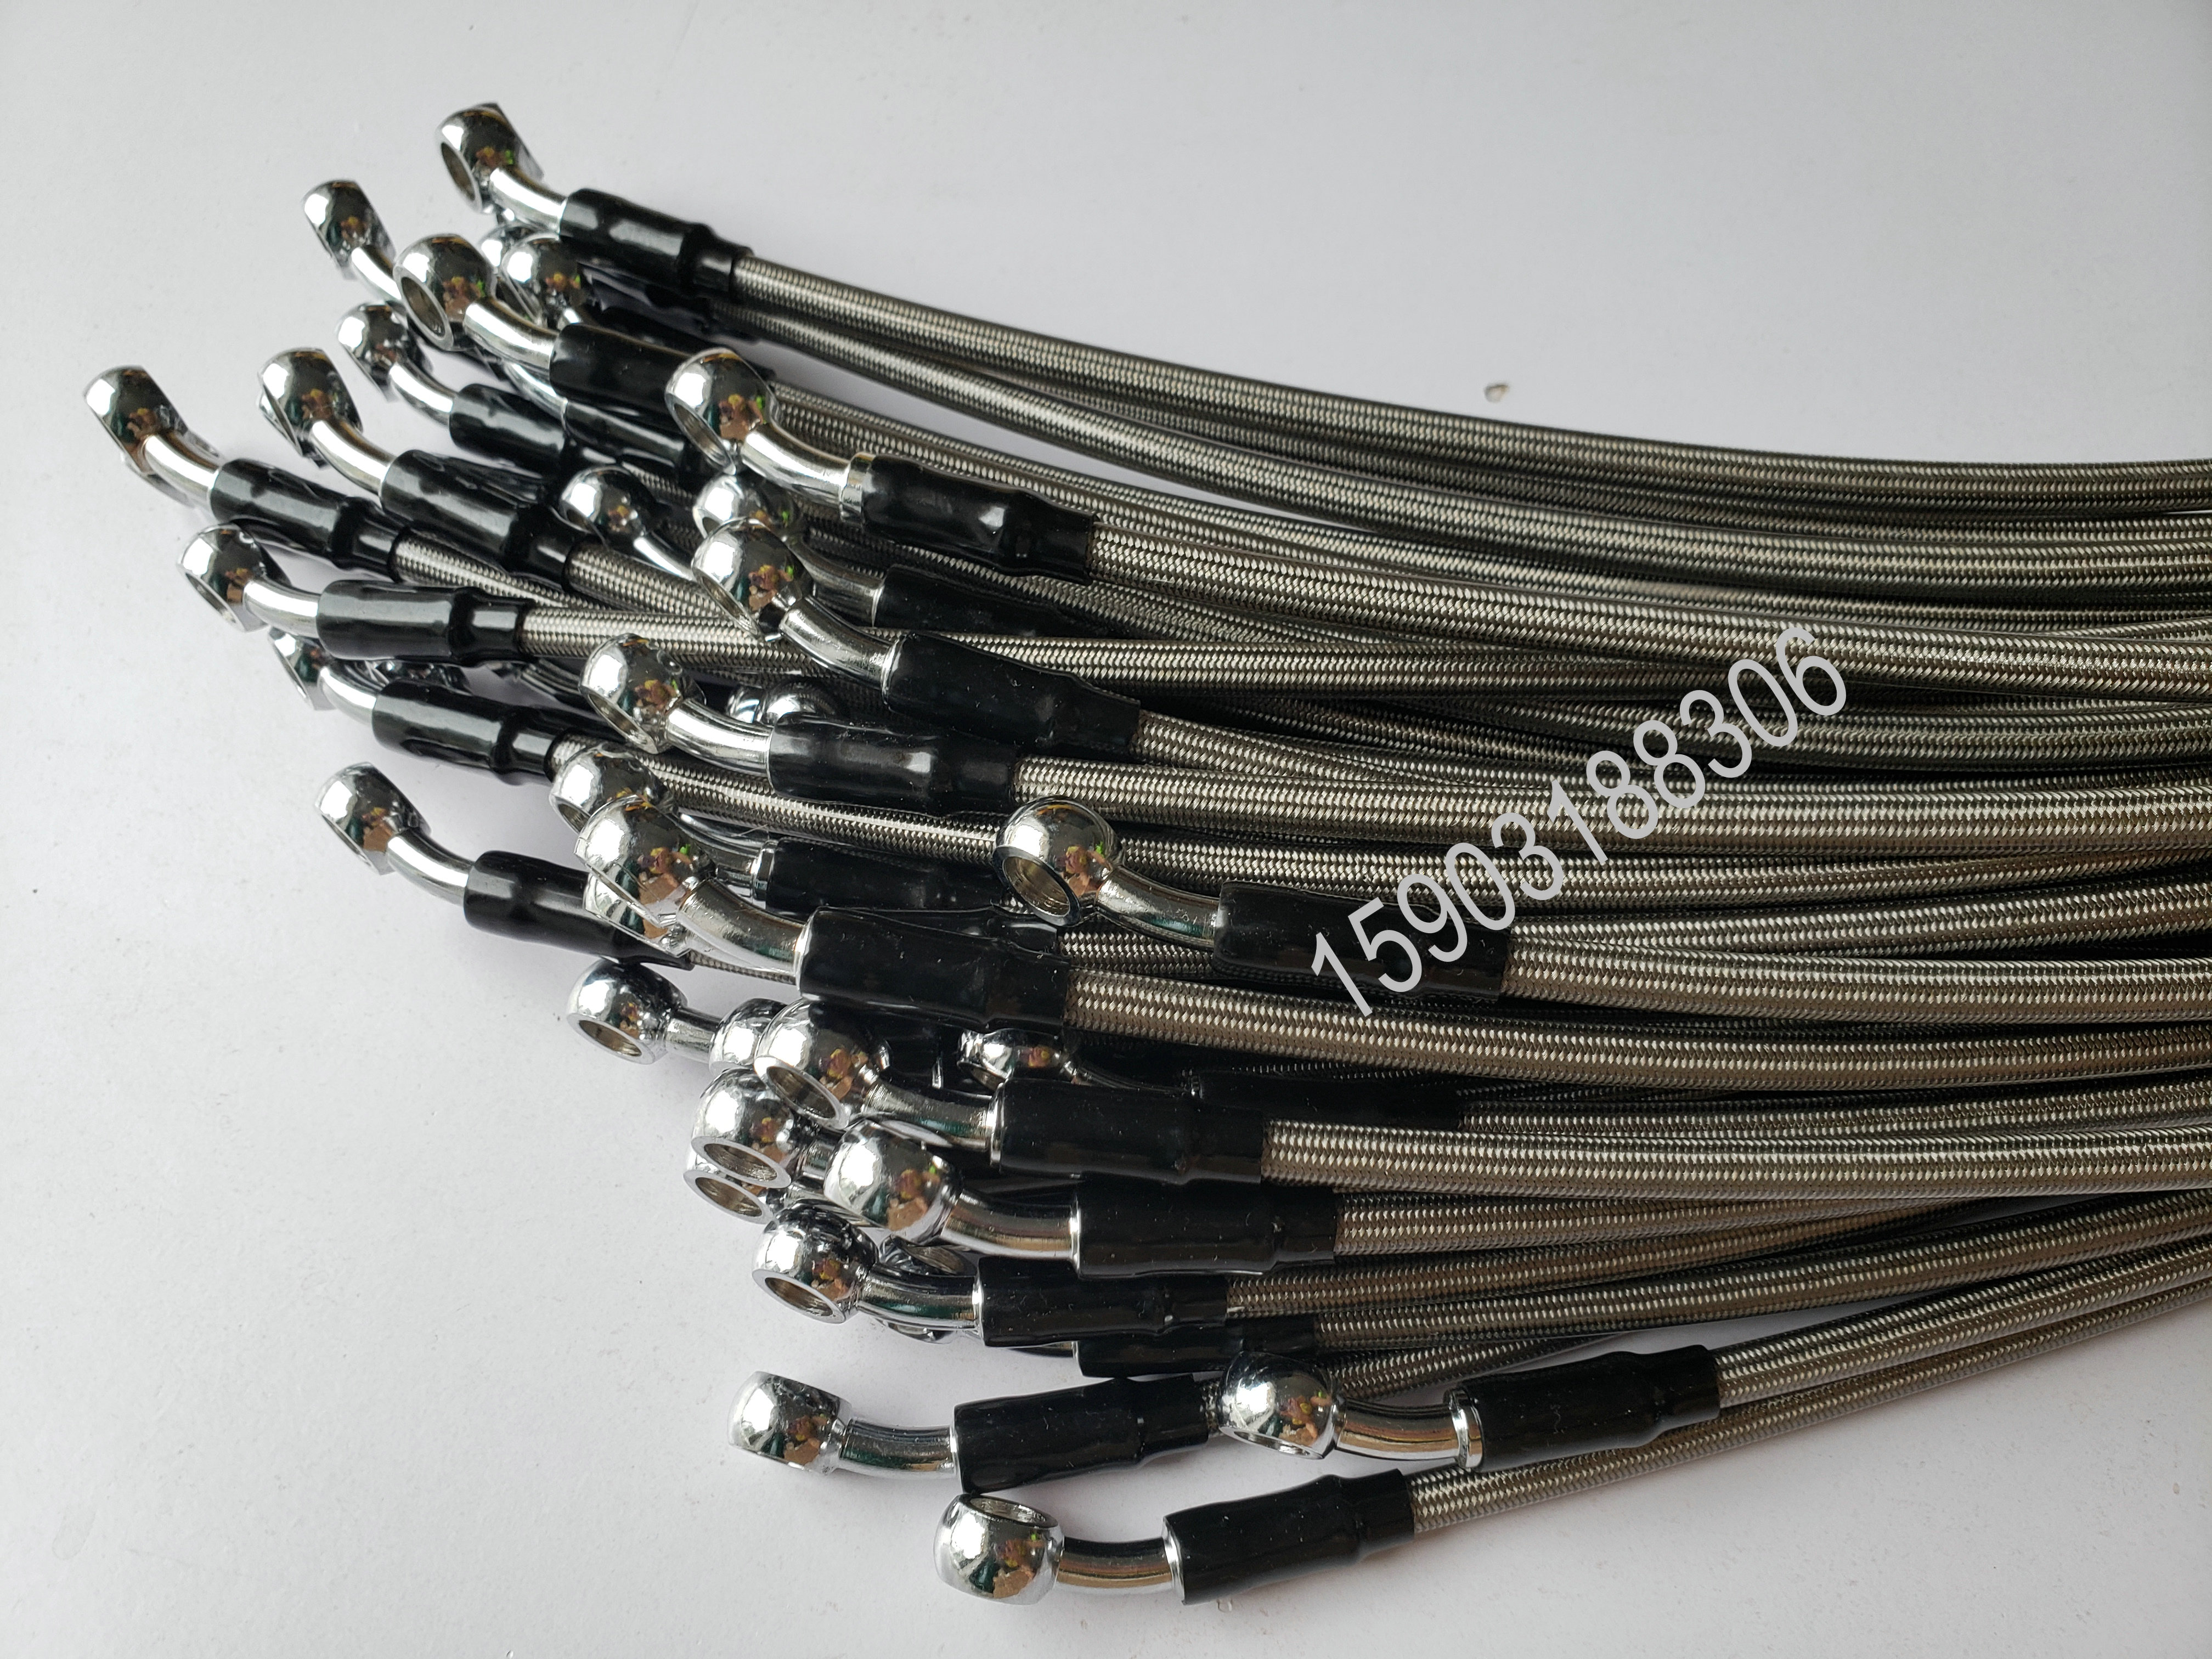 Auto Spare Parts Universal Performance Fit Atv Bike Motorcycle flexible Brake hose Pipe Tubing Line cable